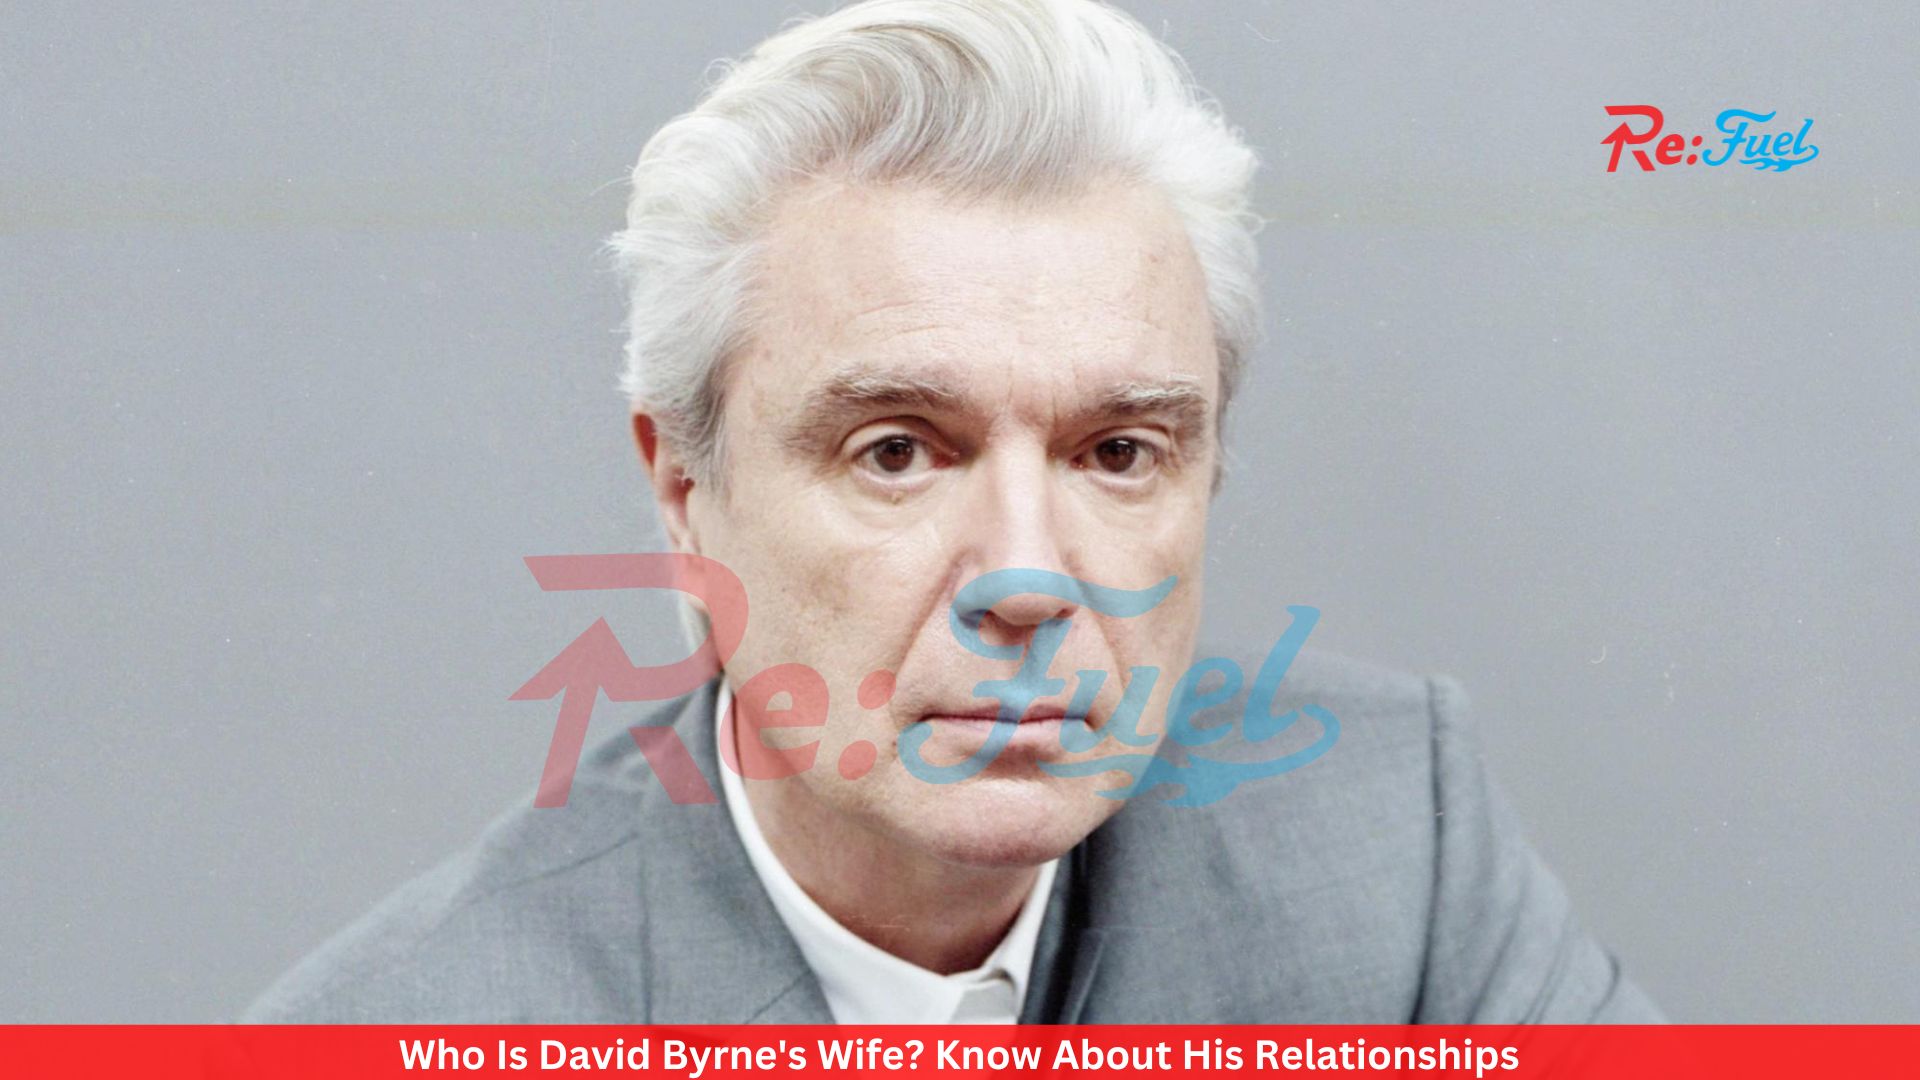 Who Is David Byrne's Wife? Know About His Relationships